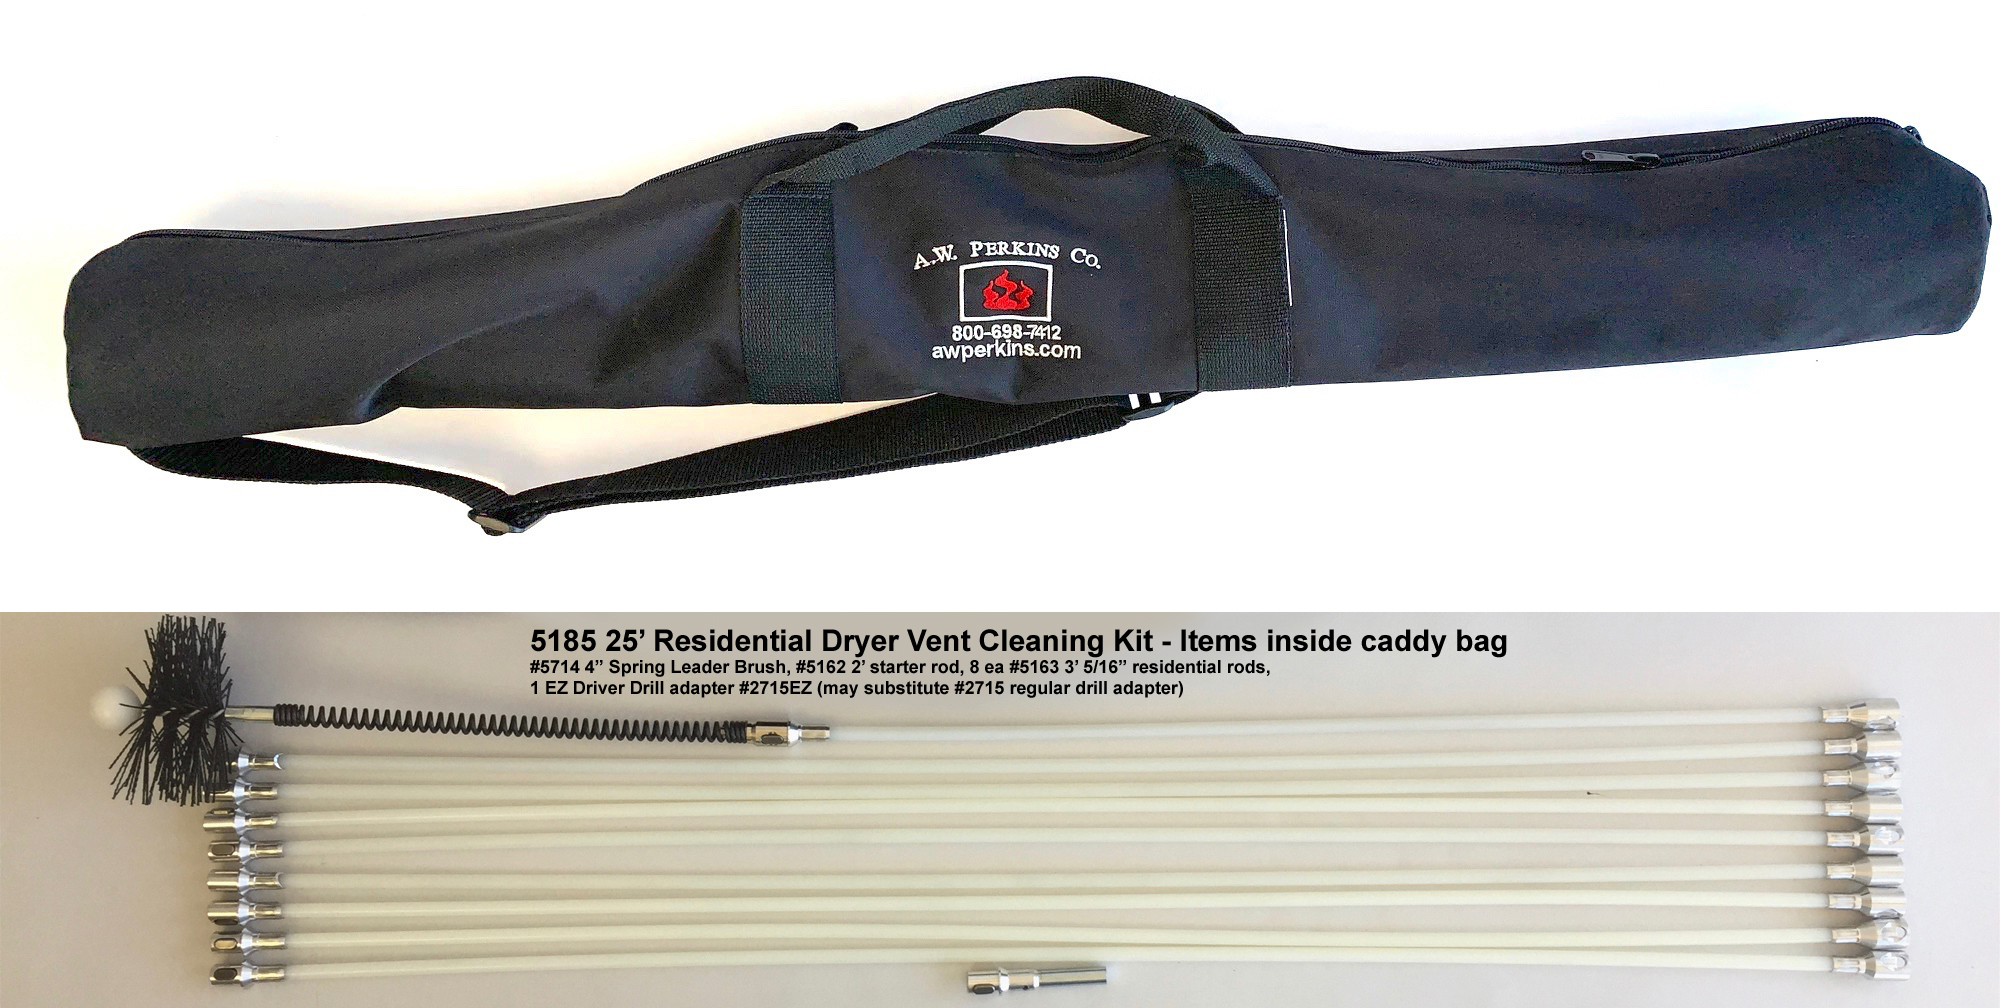 5185 25' Residential Rotary Brush Dryer Vent Cleaning Kit w/Nylon Caddy